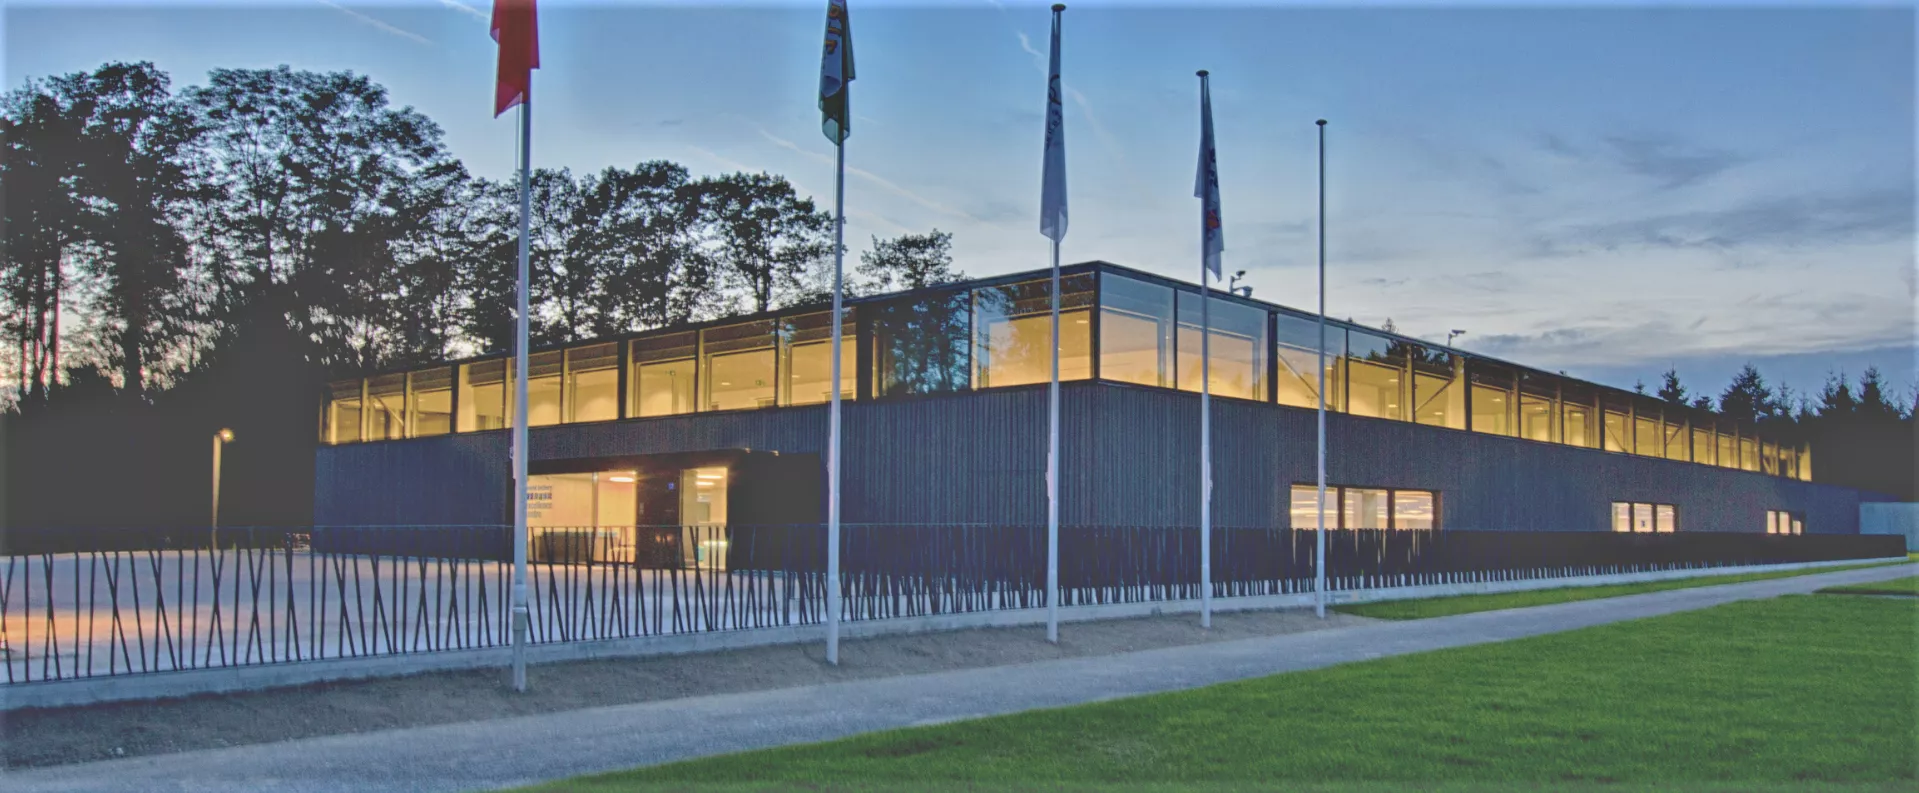 World Archery Excellence Centre in Switzerland, Europe | Archery - Rated 1.7